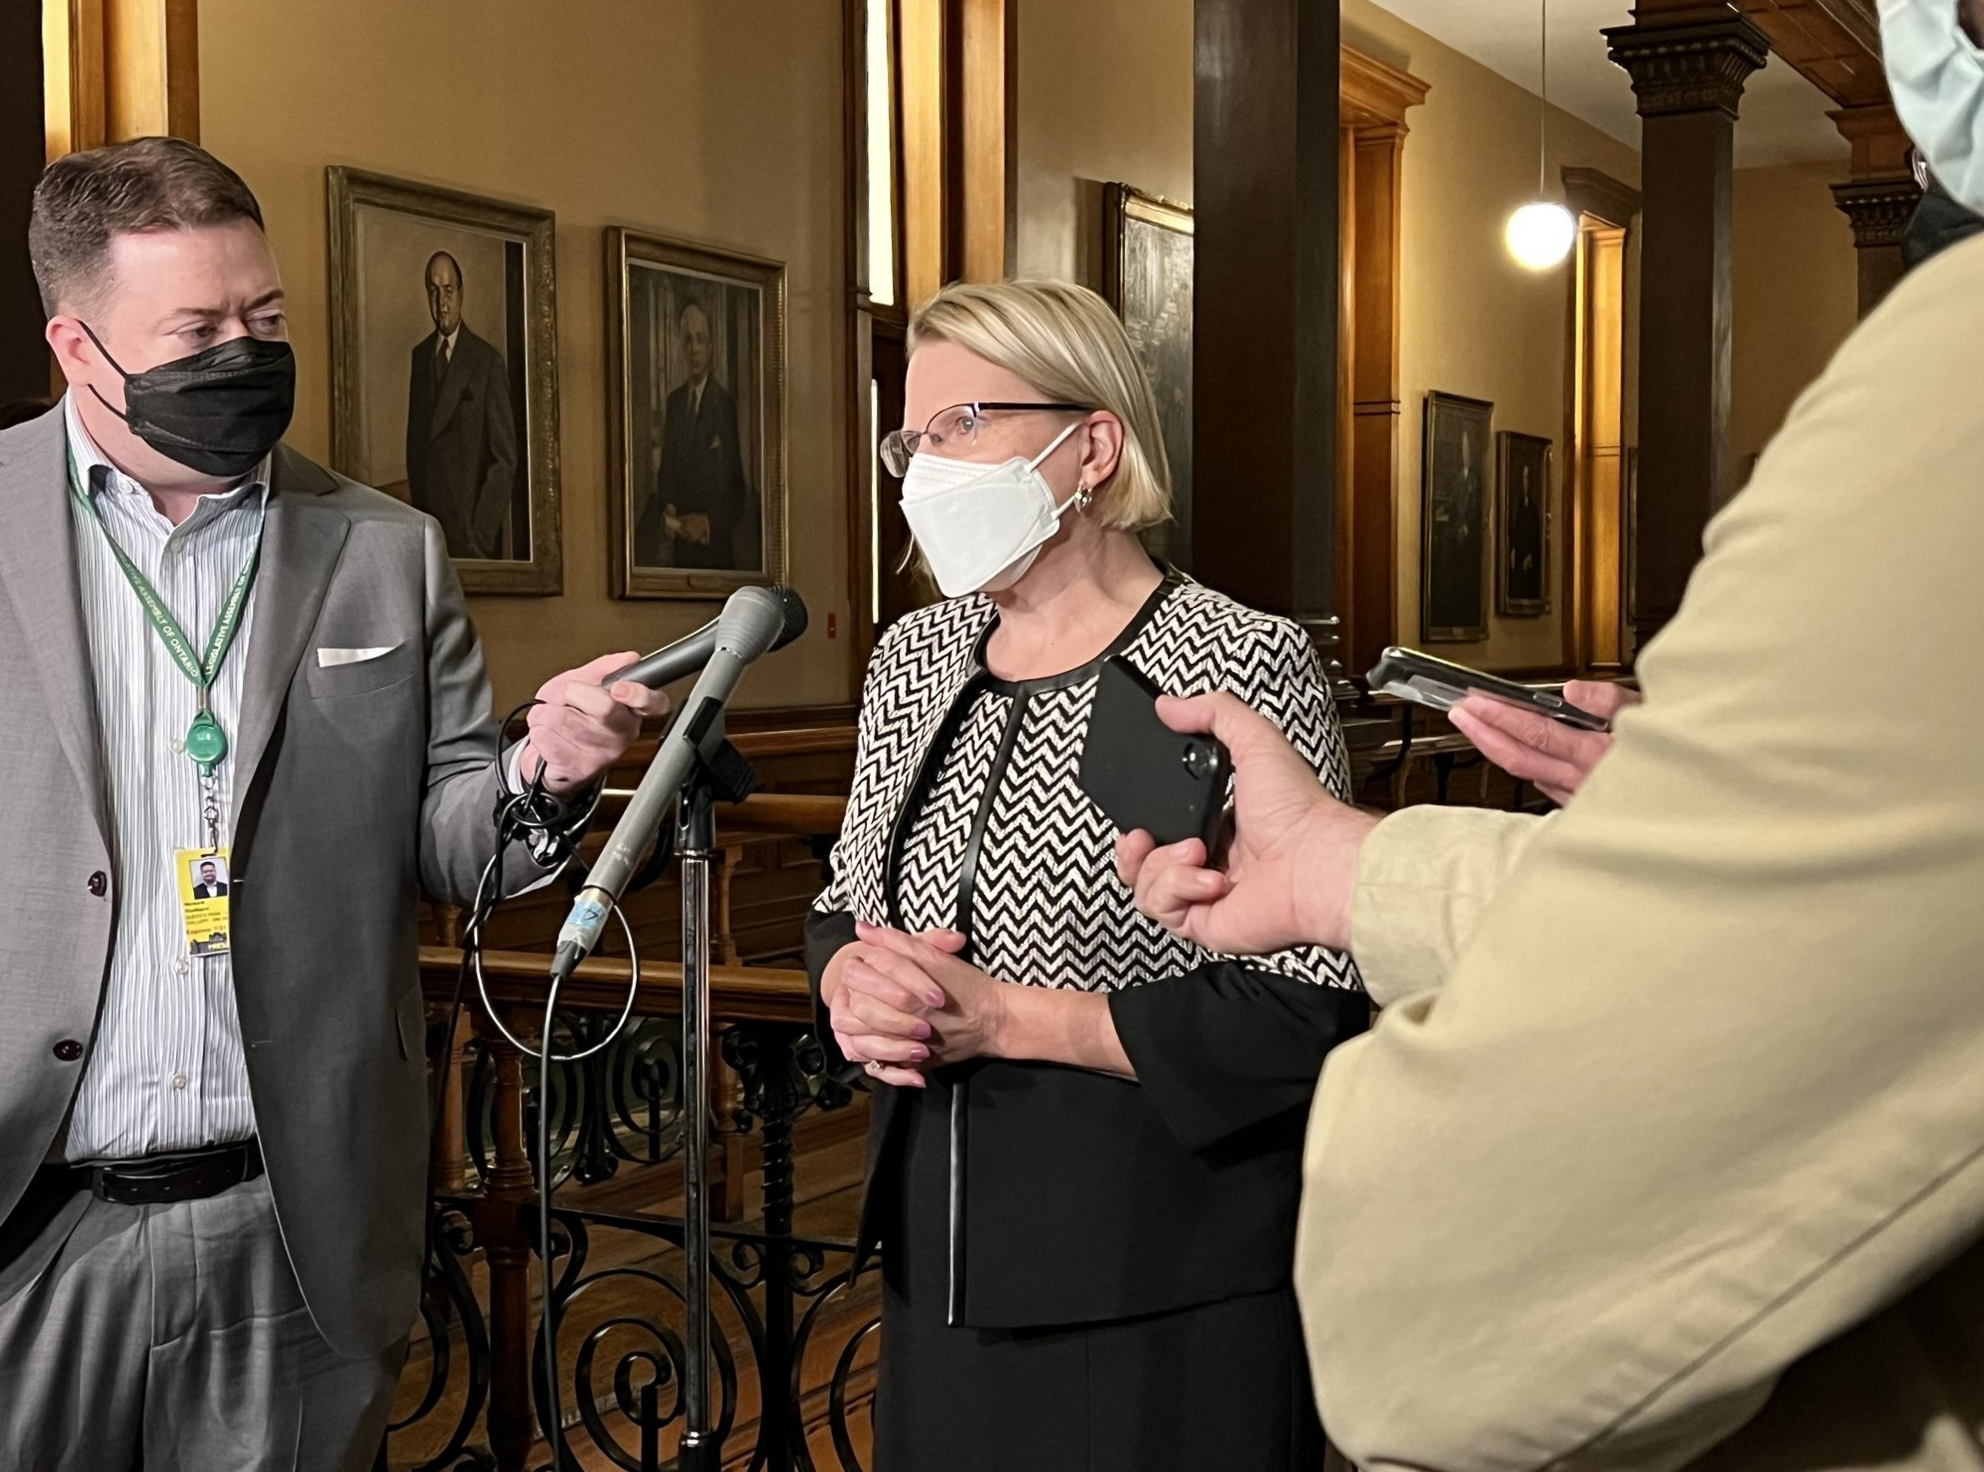 ‘Wearing a mask is personal choice’: Health Minister